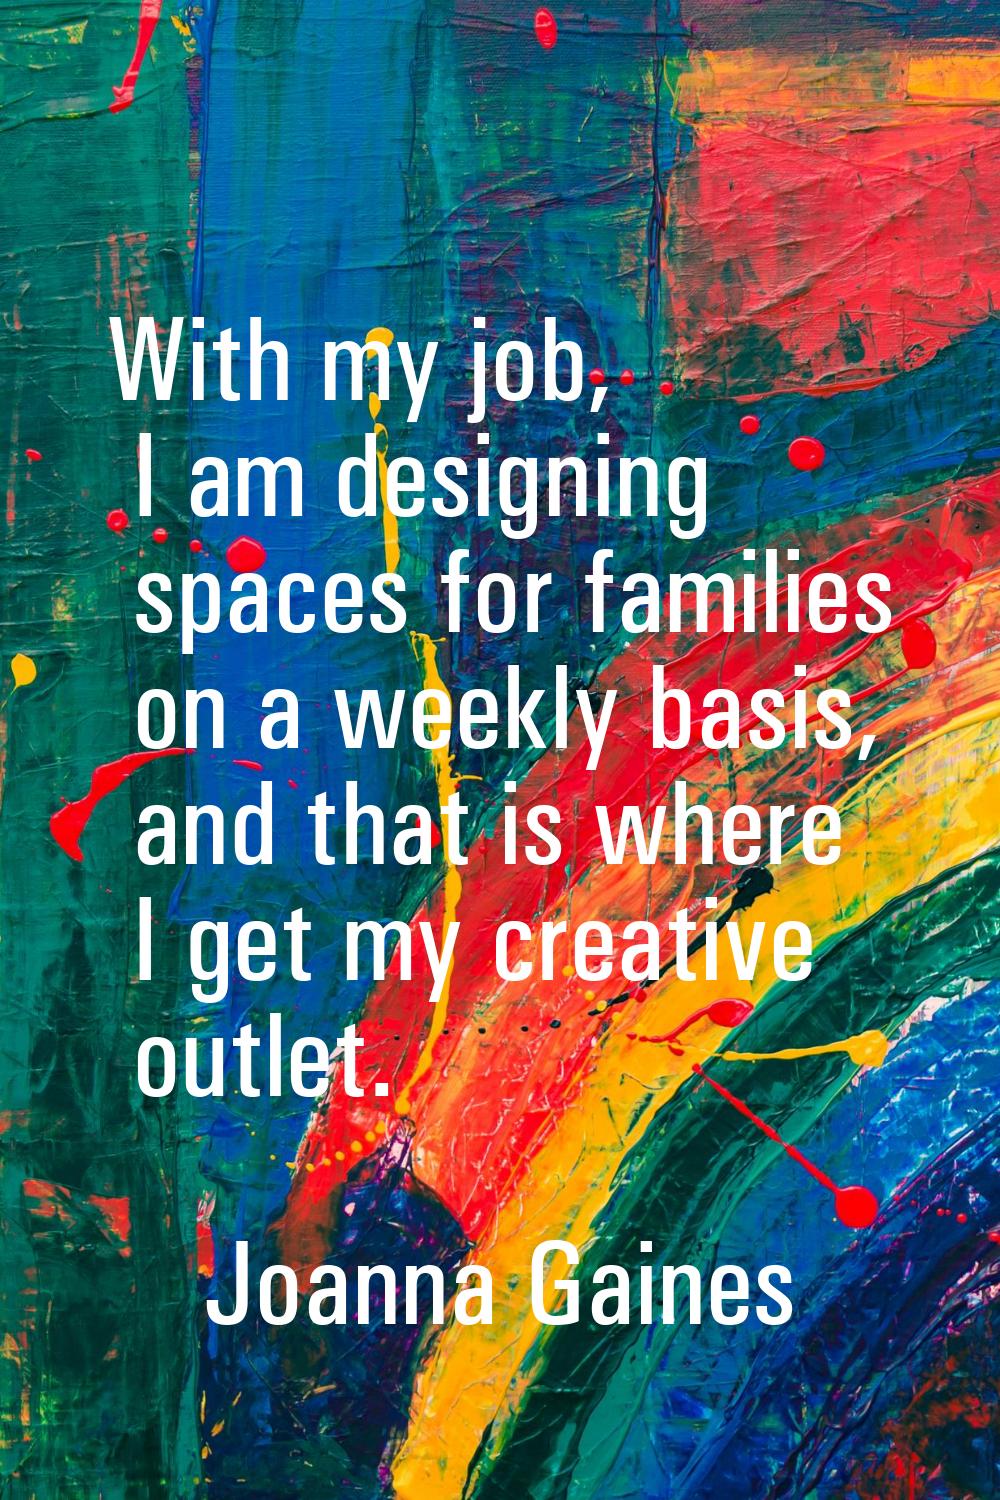 With my job, I am designing spaces for families on a weekly basis, and that is where I get my creat